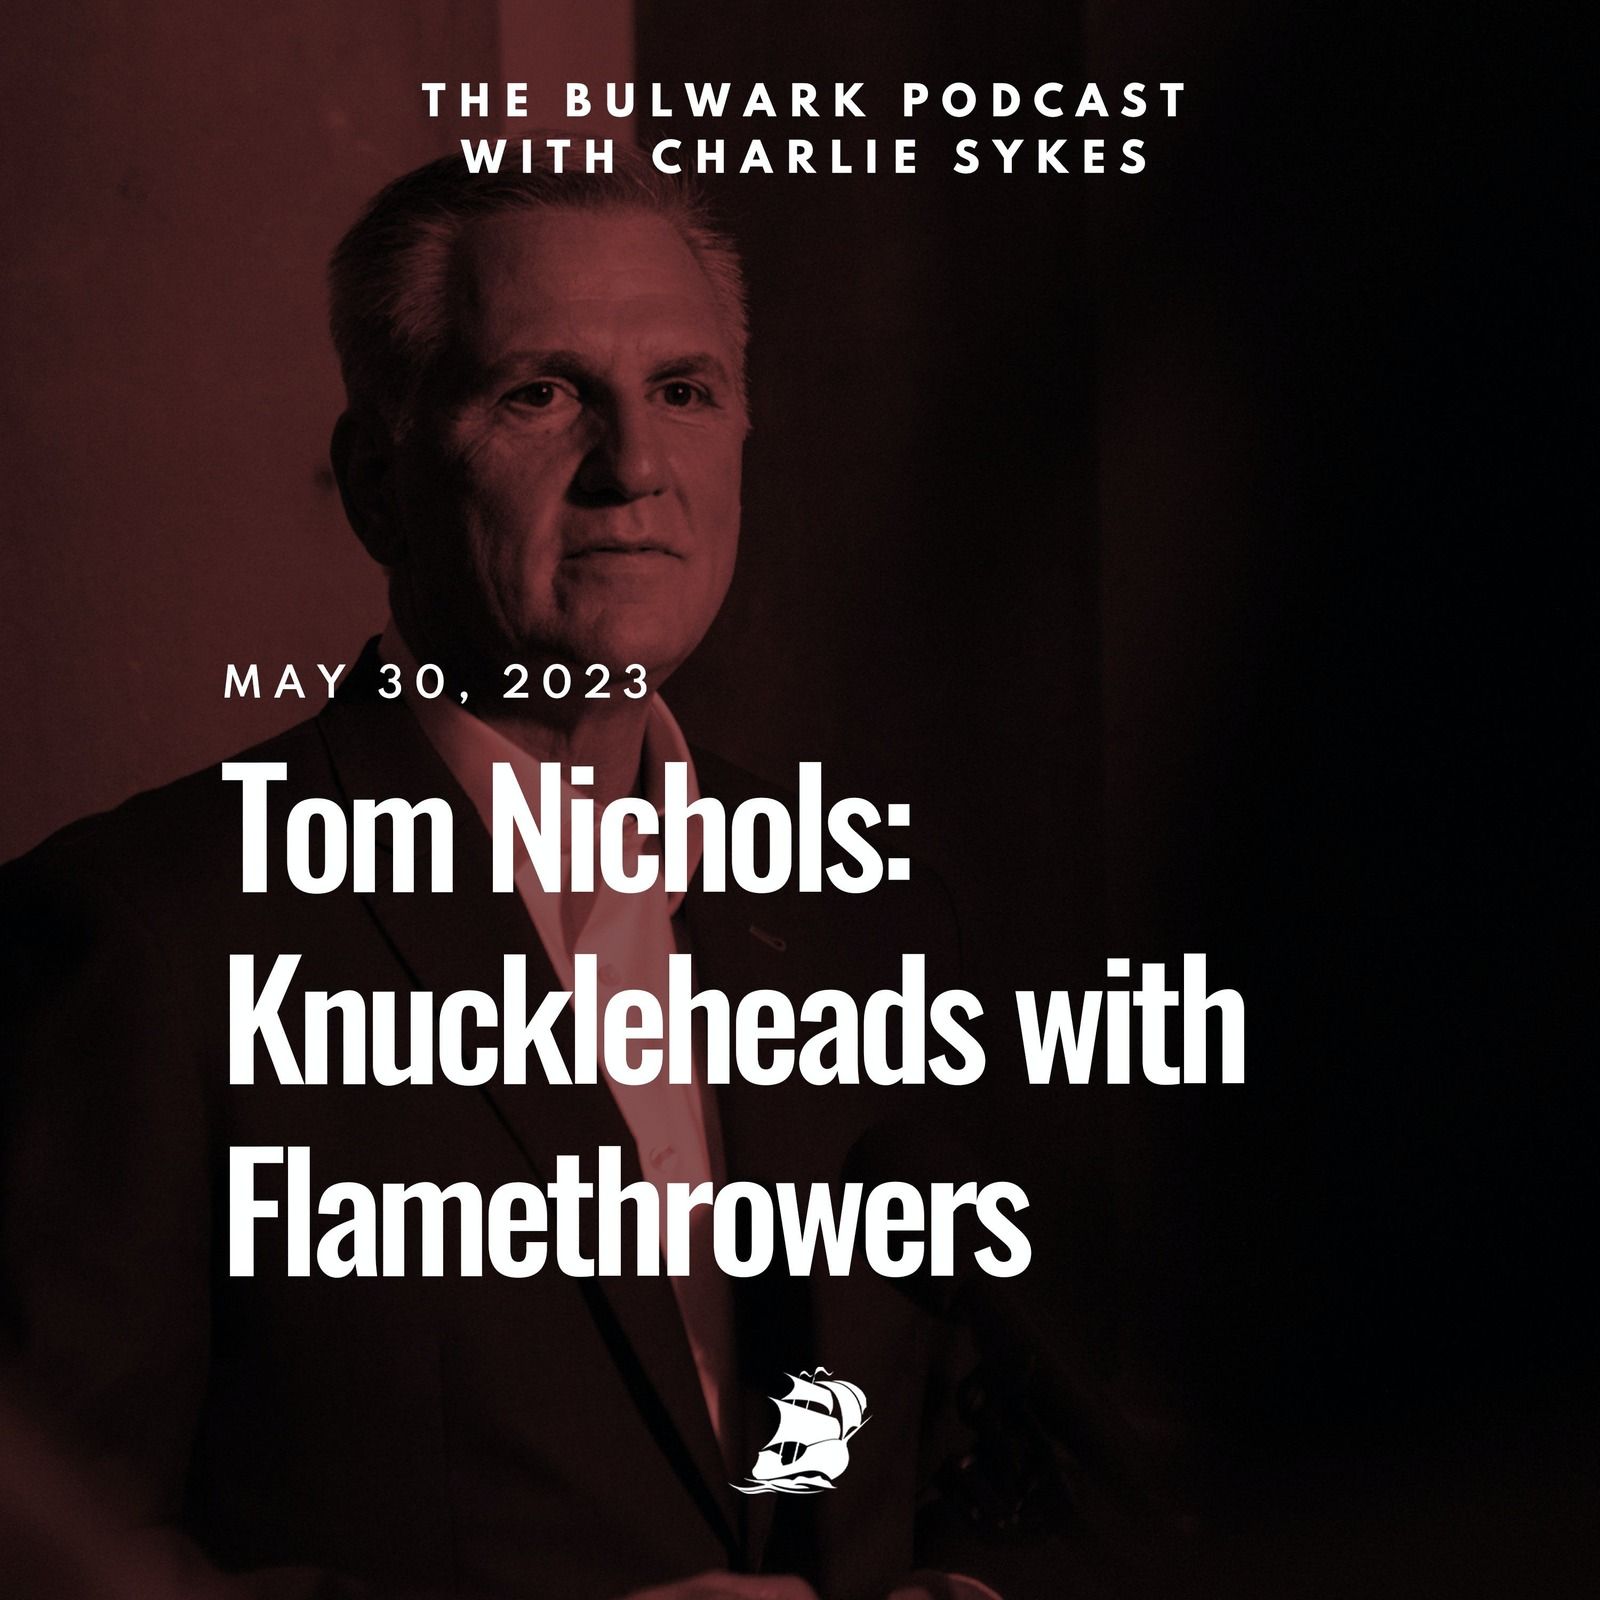 Tom Nichols: Knuckleheads with Flamethrowers by The Bulwark Podcast